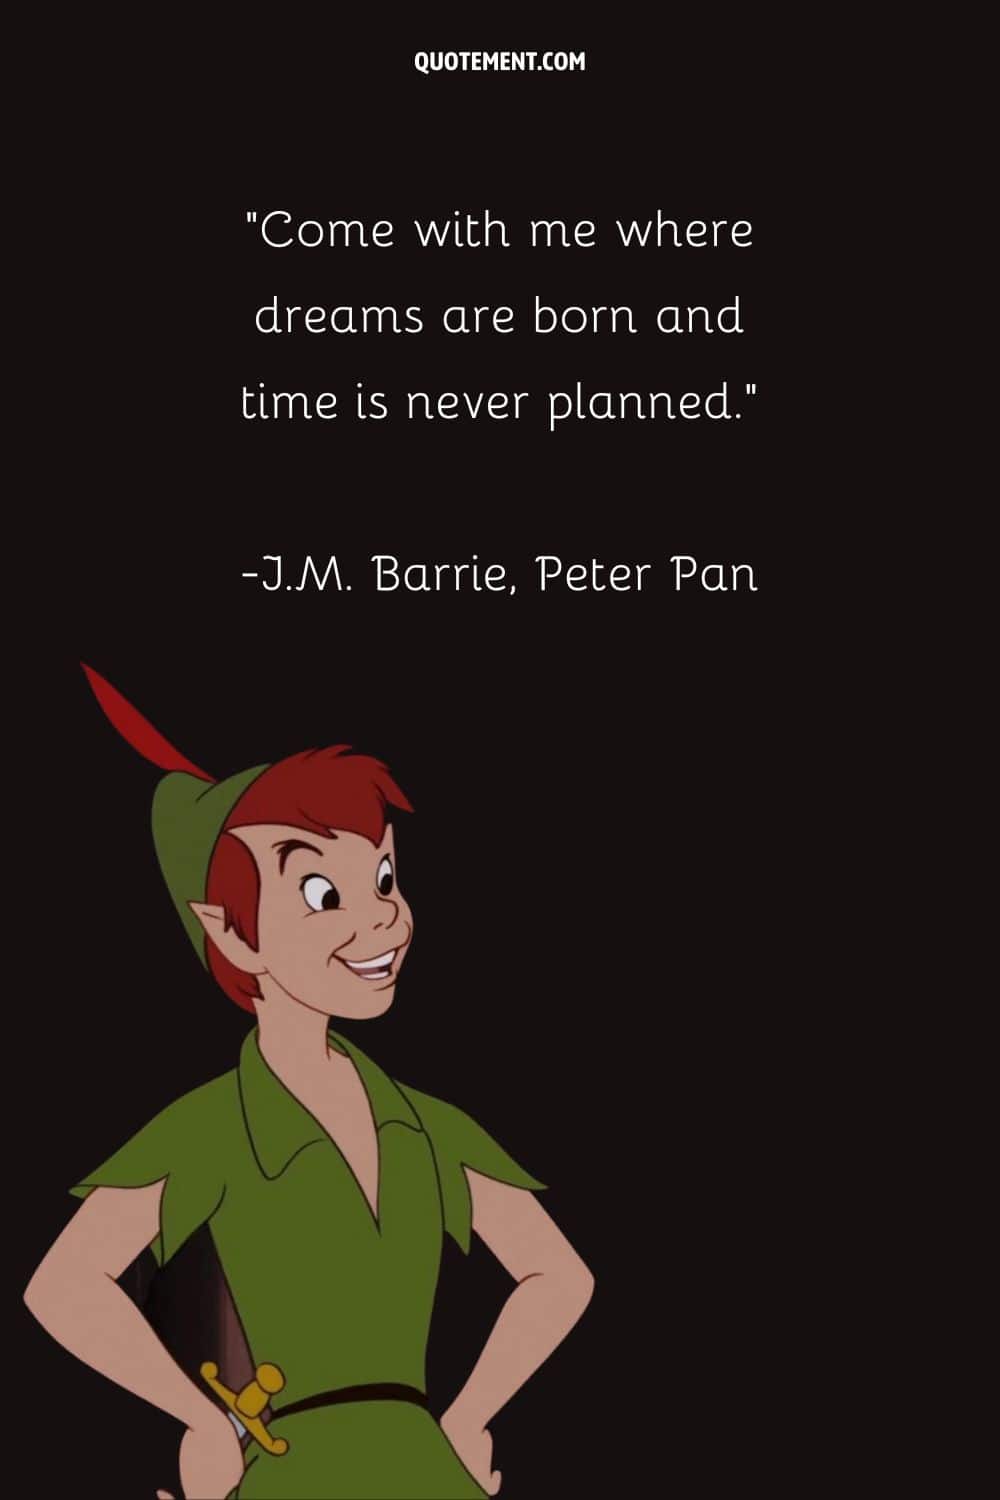 “Come with me where dreams are born and time is never planned.” ― J.M. Barrie, Peter Pan